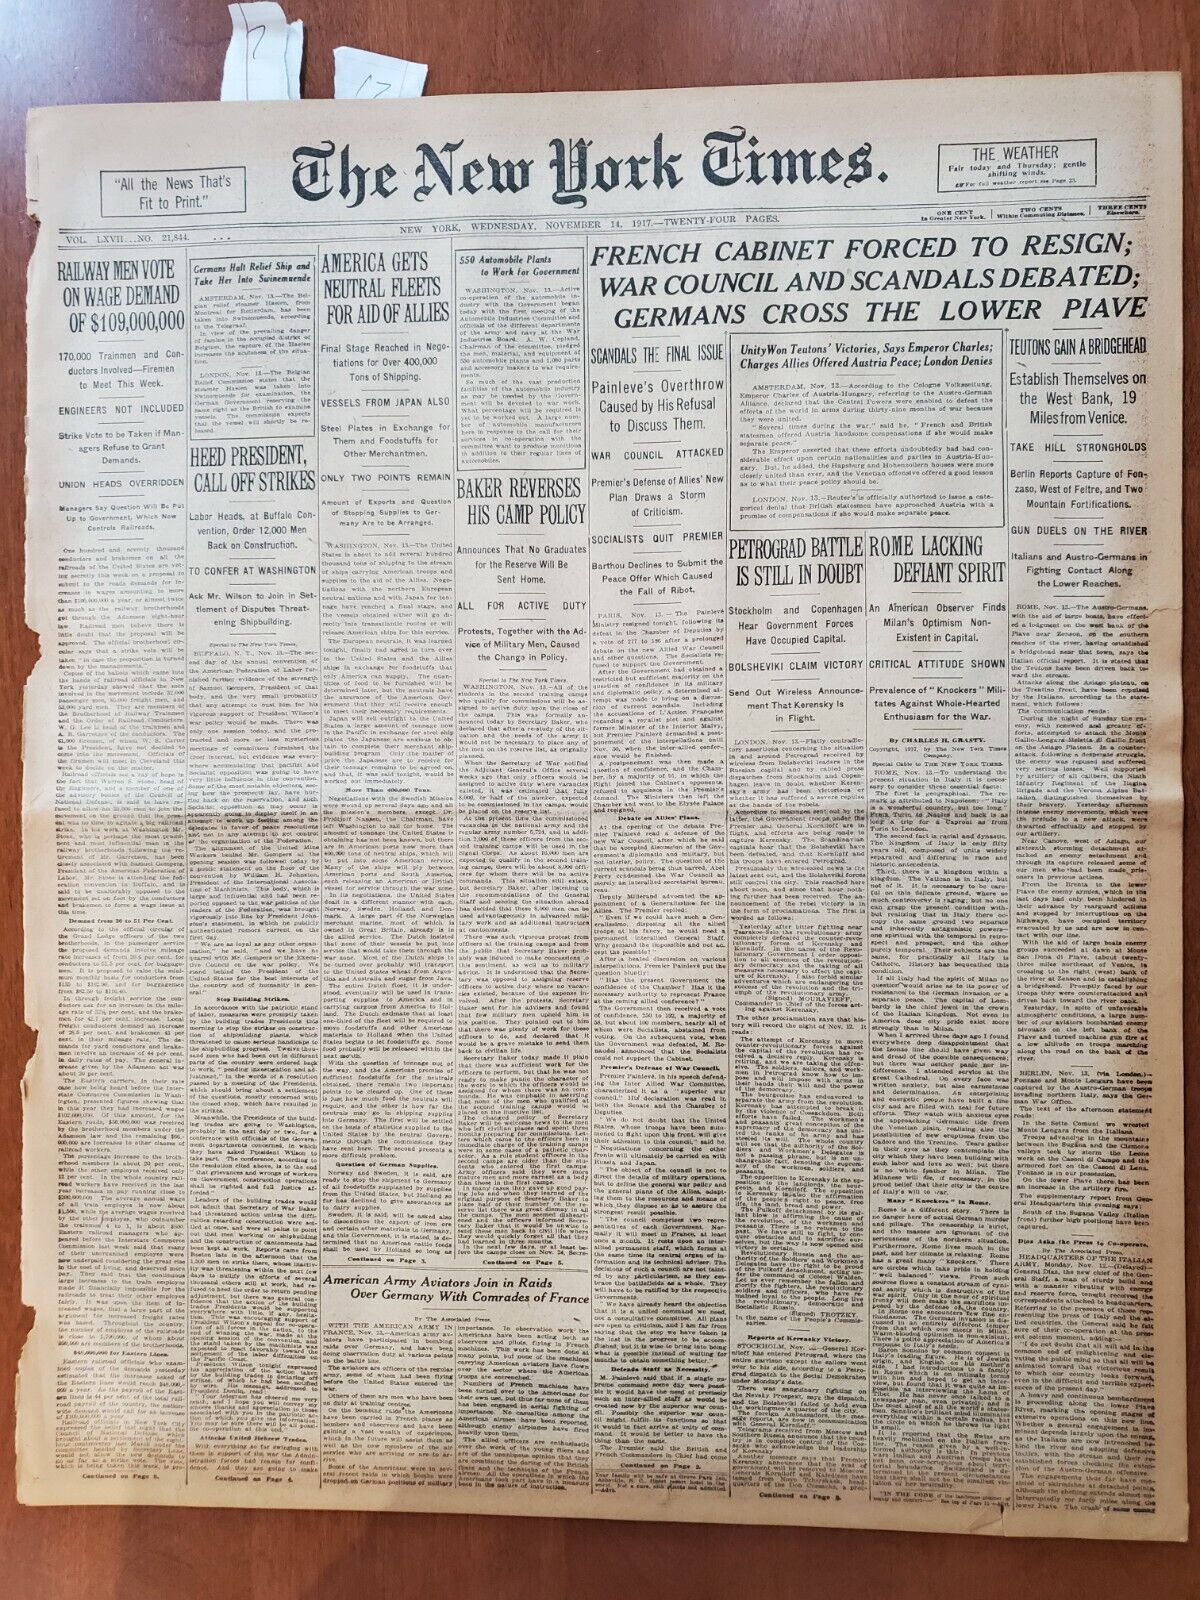 1917 NOVEMBER 14 NEW YORK TIMES - FRENCH CABINET FORCED TO RESIGN - NT 8069